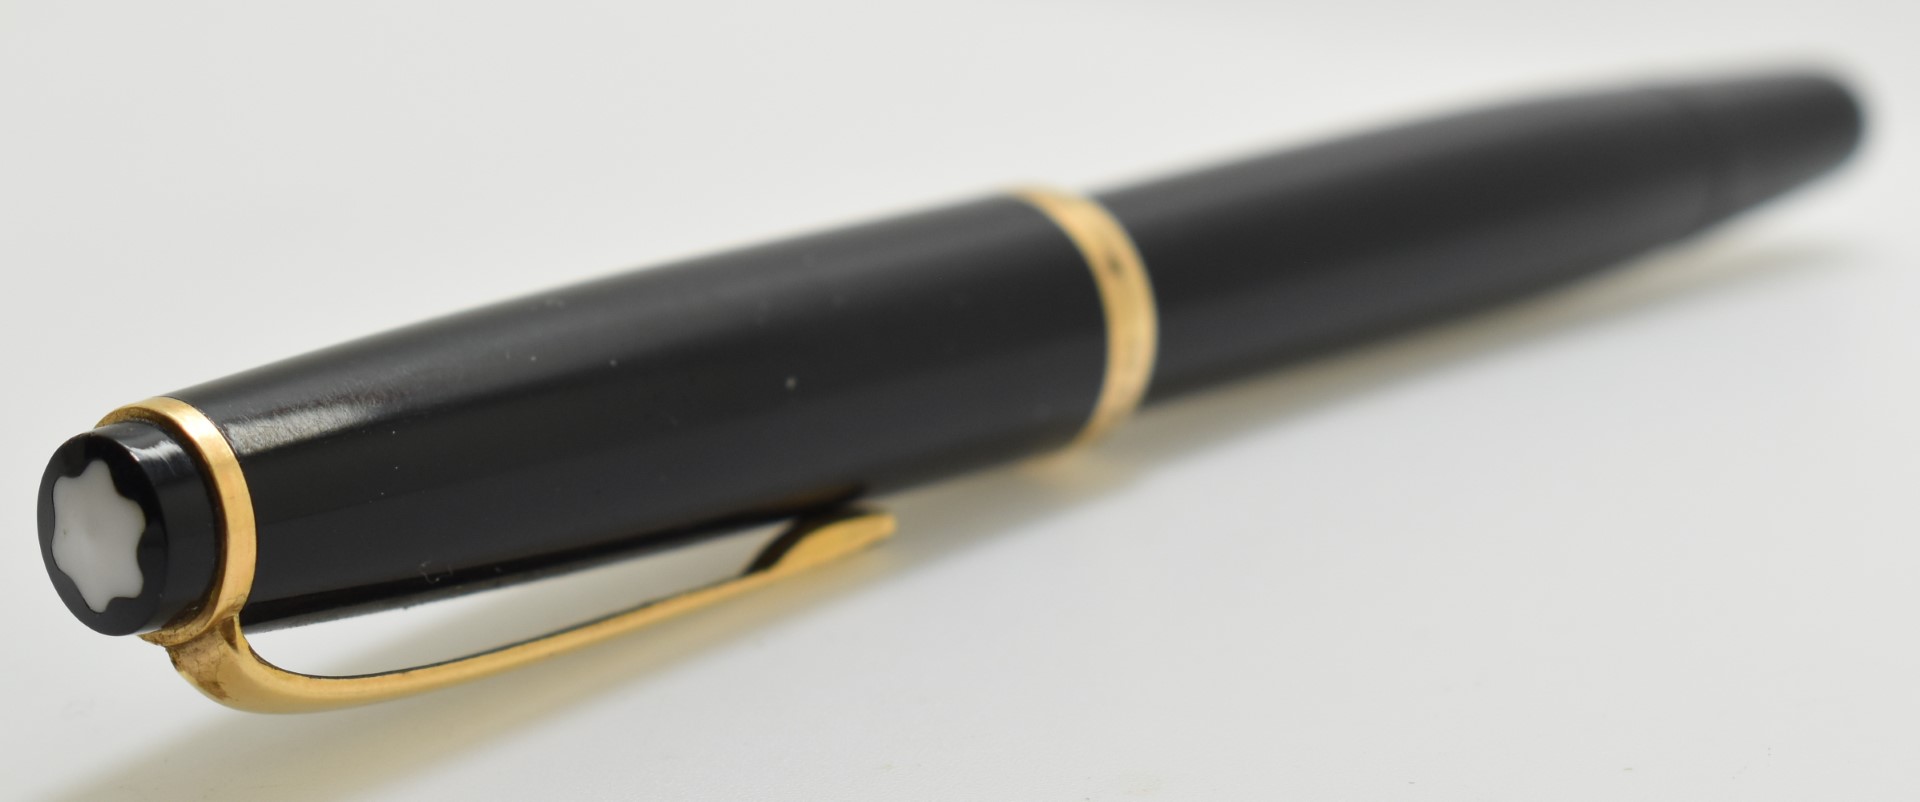 Montblanc 342 fountain pen with number 2 nib, black resin body and gold plated fittings, in original - Image 5 of 10